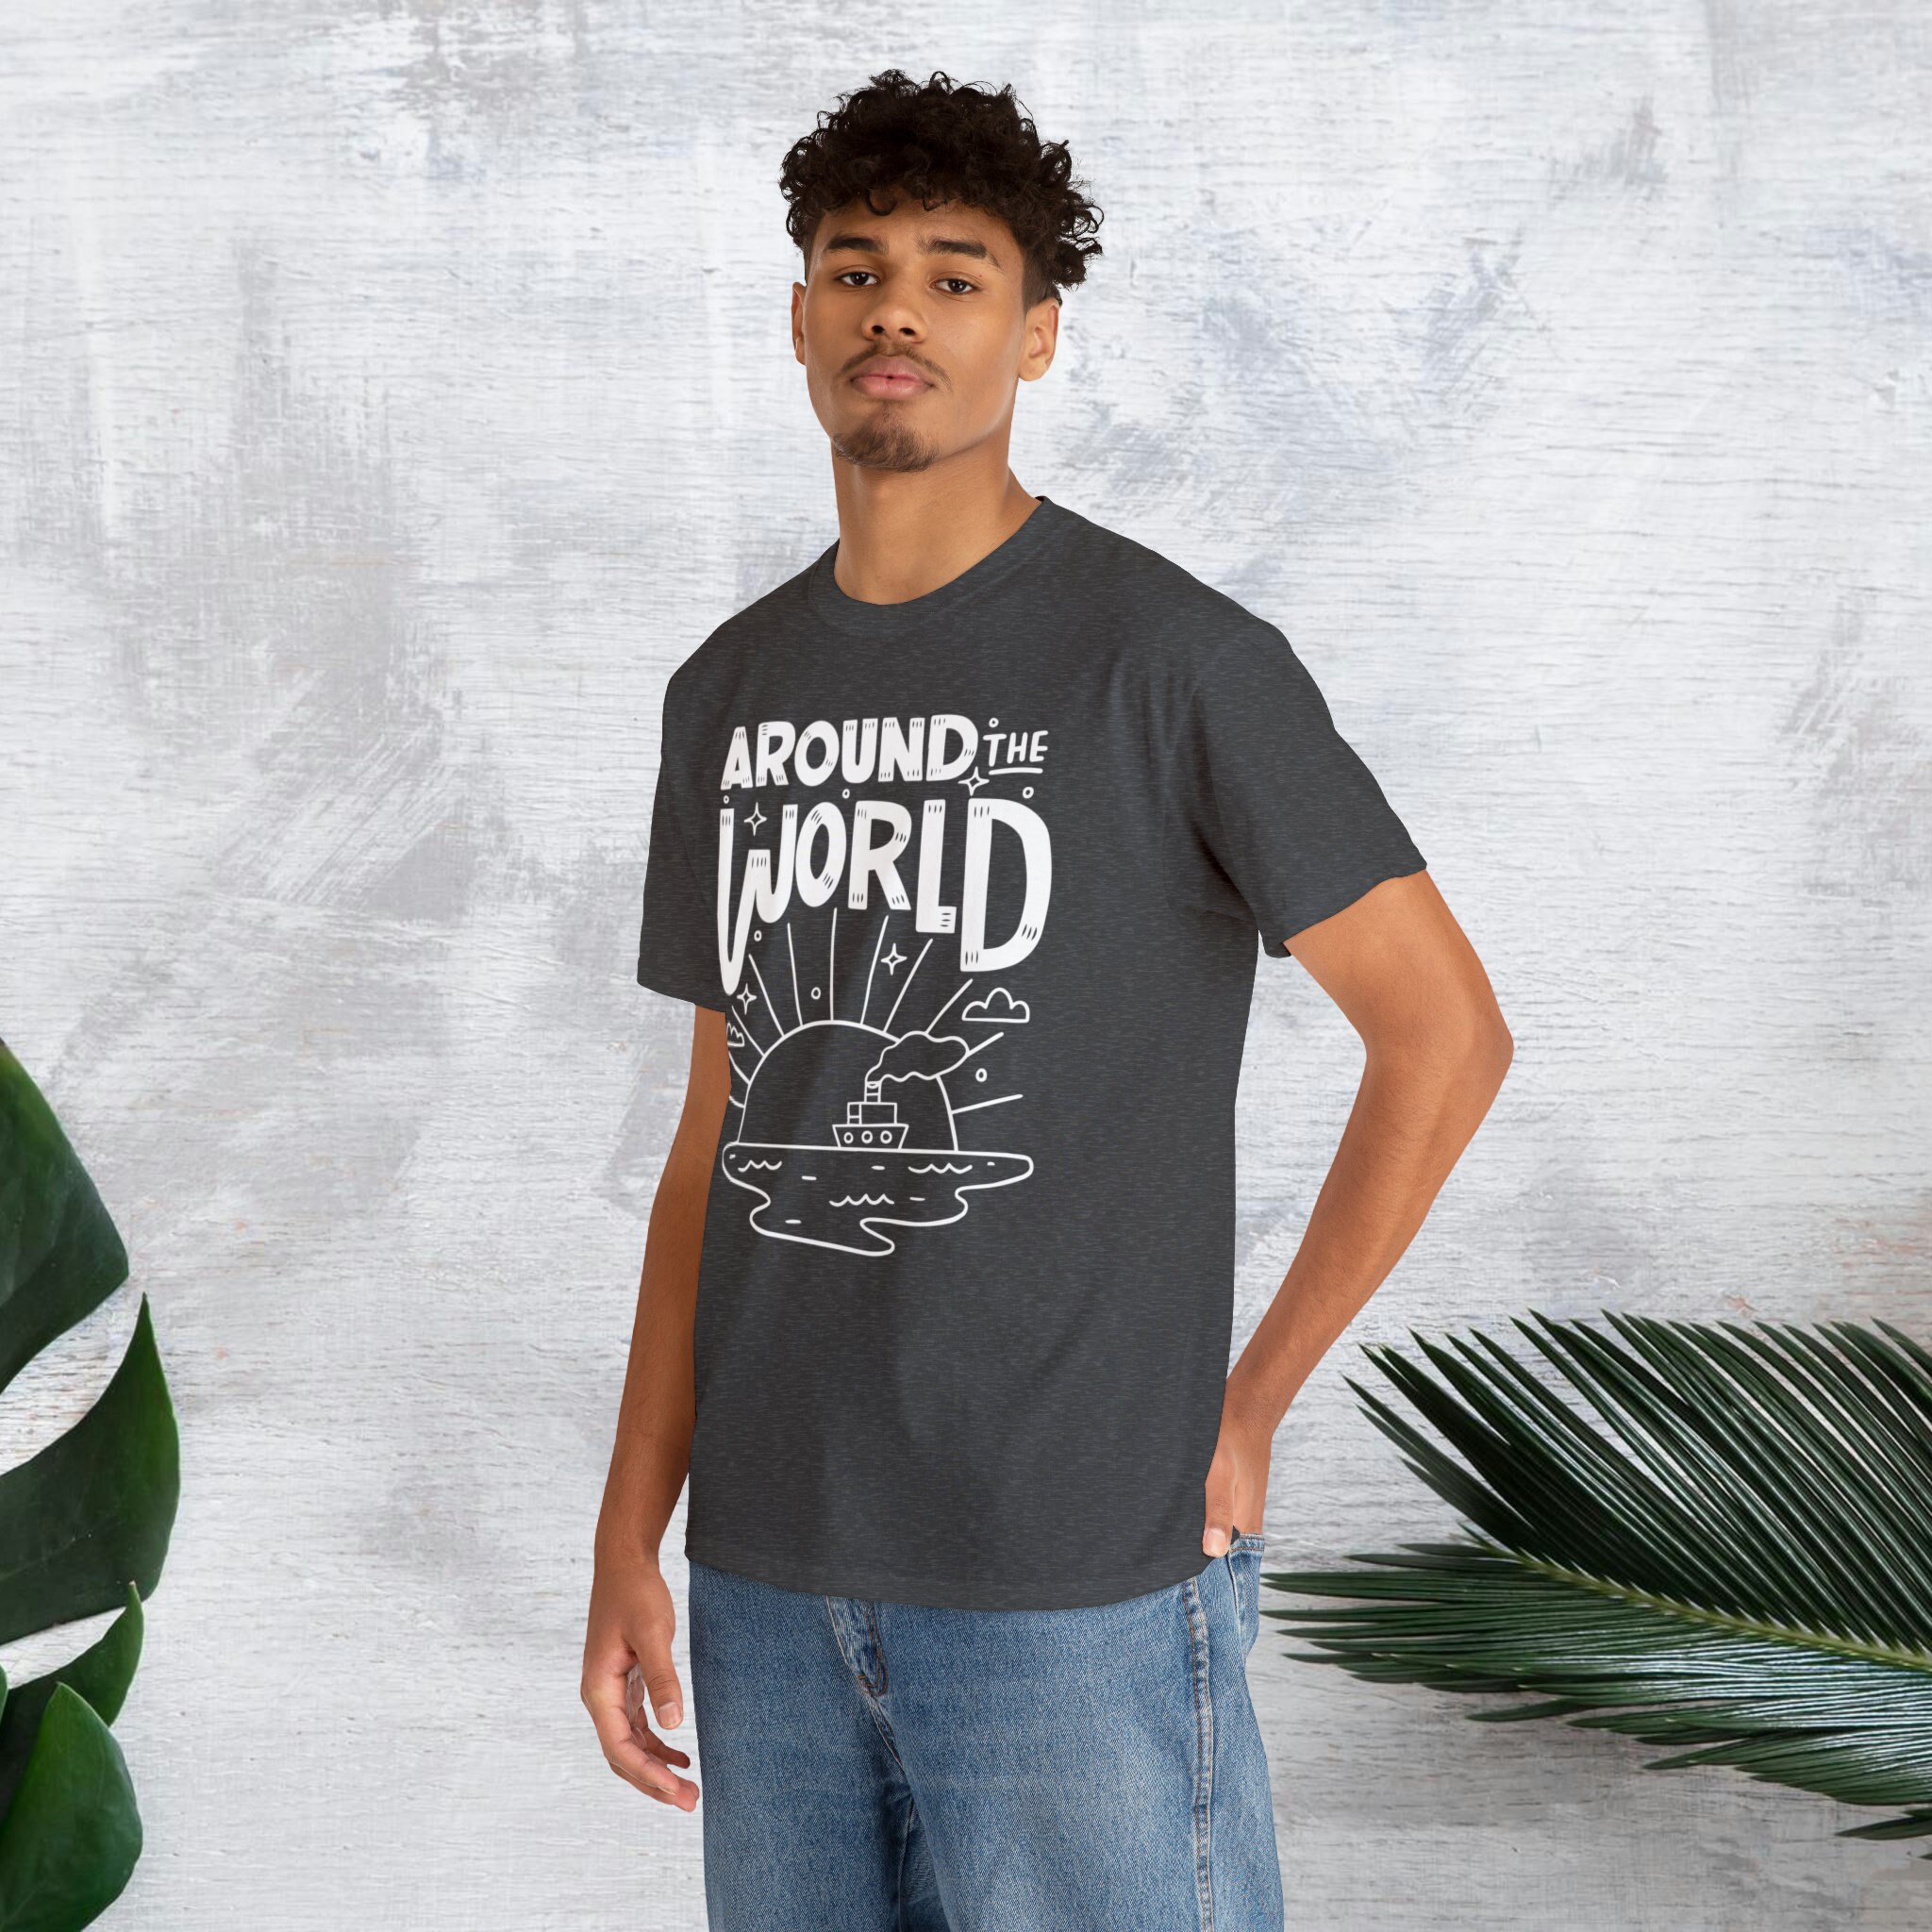 Discover Around The World Adventure T-Shirts - Unisex Cotton T-Shirts - Classic fit T-Shirts Available Multiple Sizes & Multiple Colors